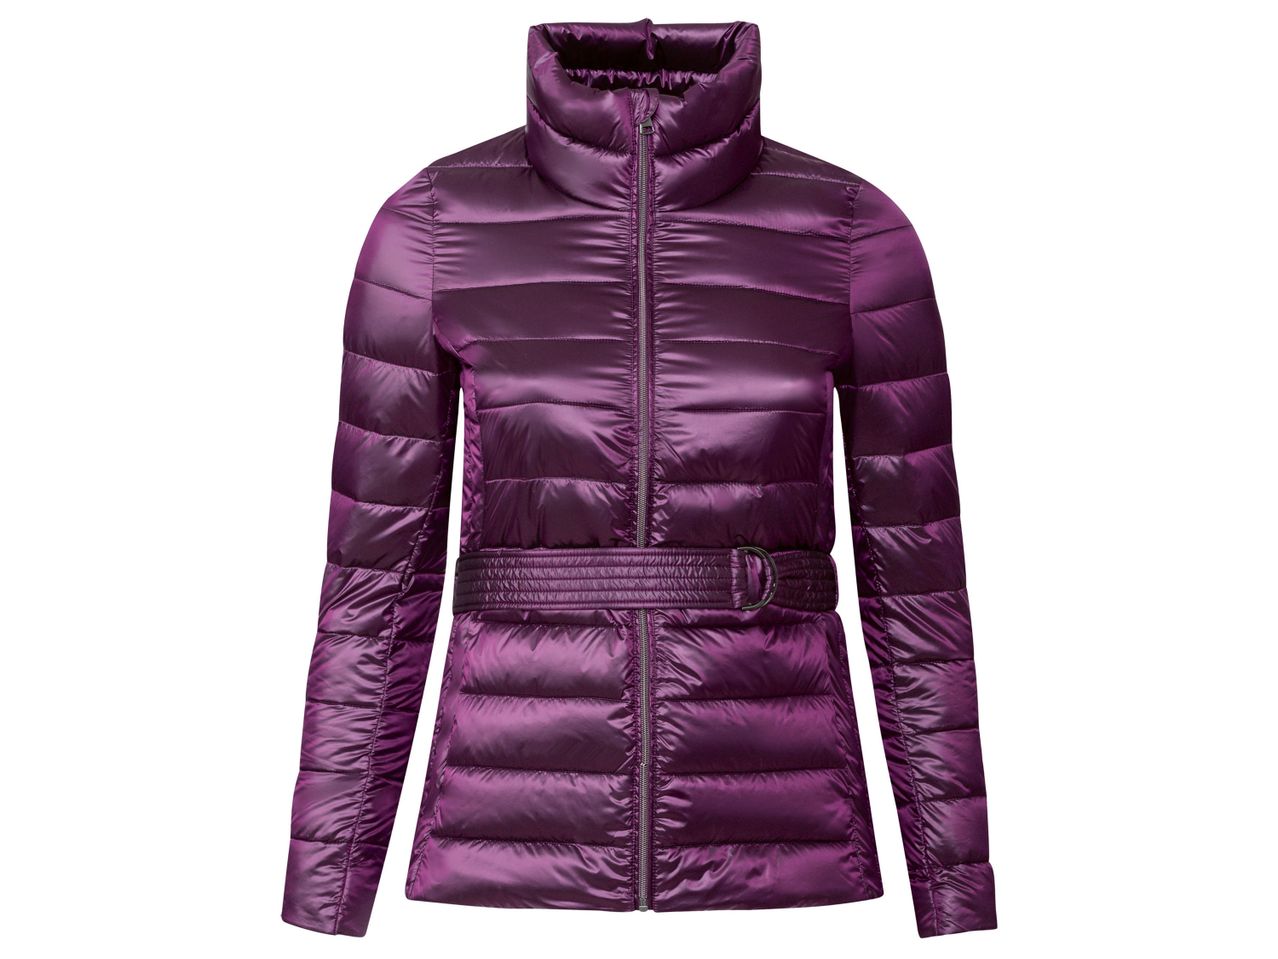 Go to full screen view: Ladies’ Lightweight Belted Jacket - Image 3